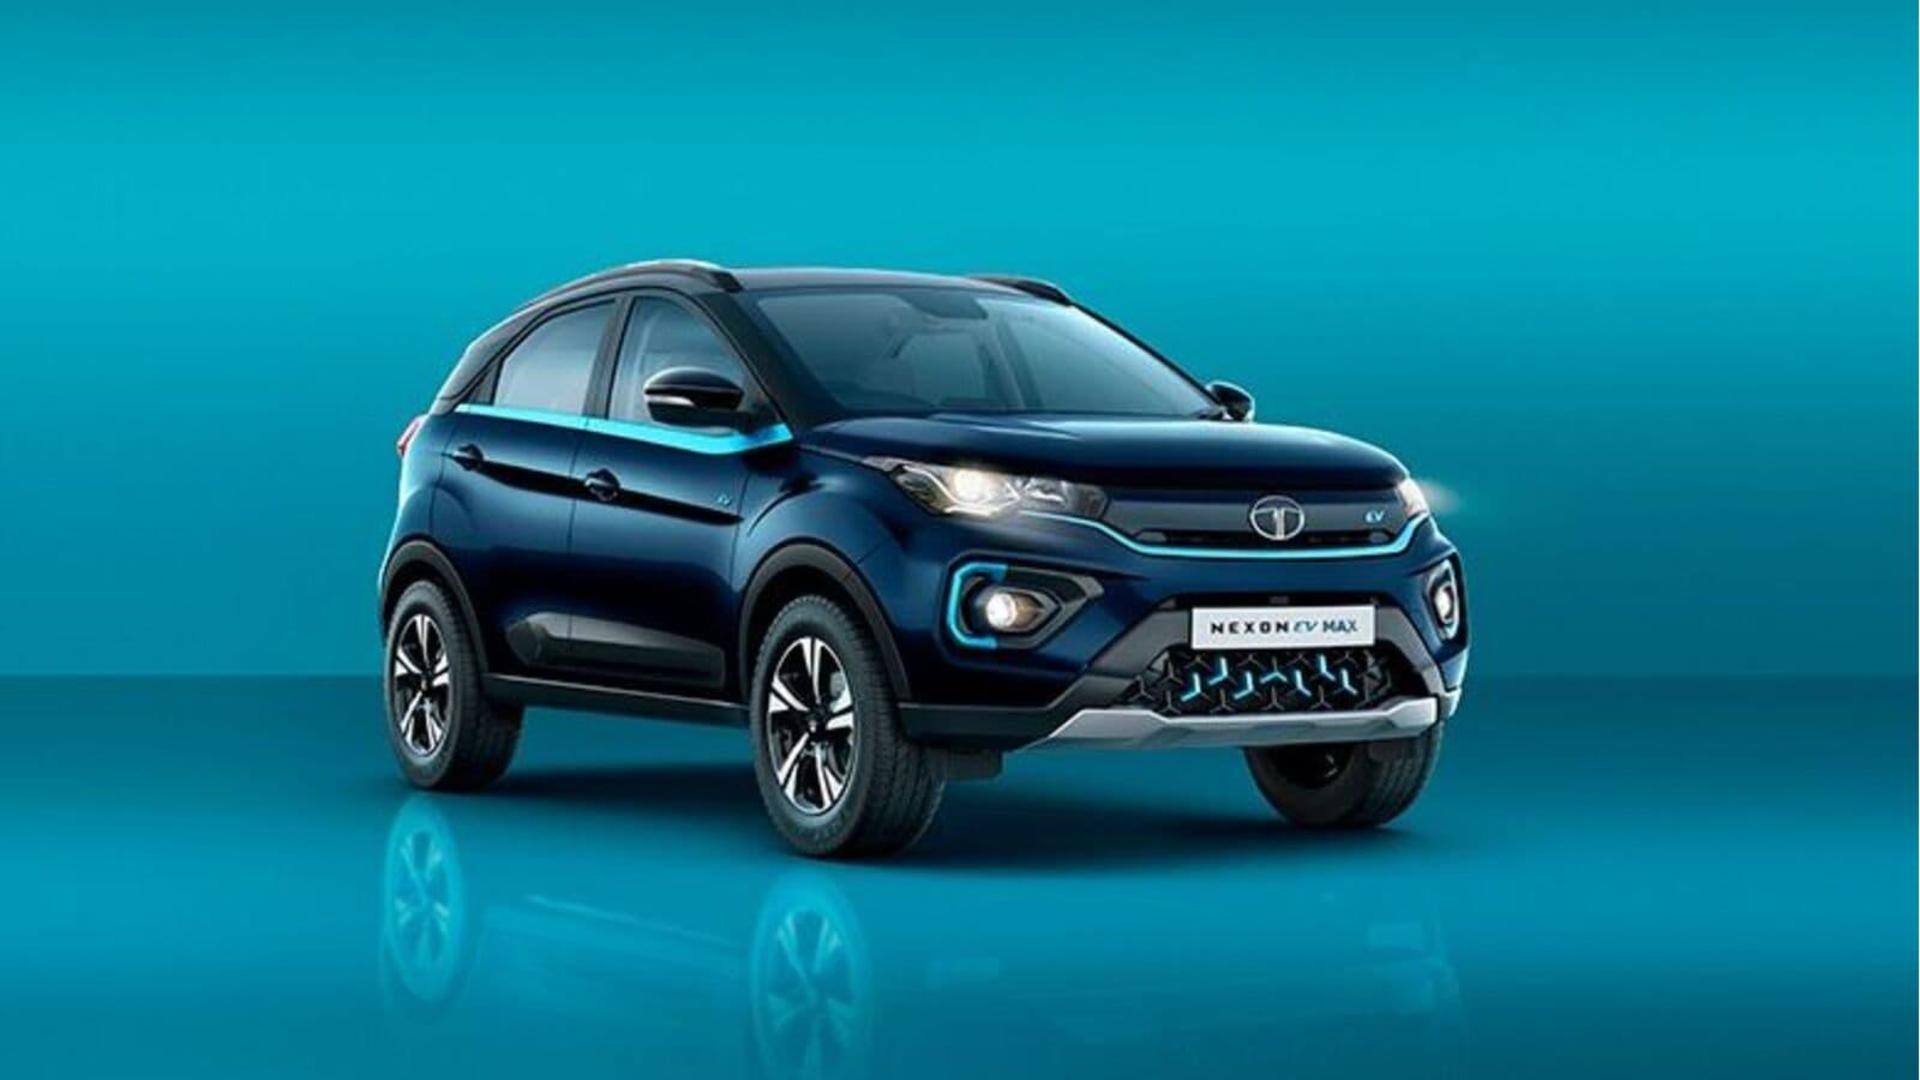 2023 Tata Nexon EV v/s current model: Know expected changes